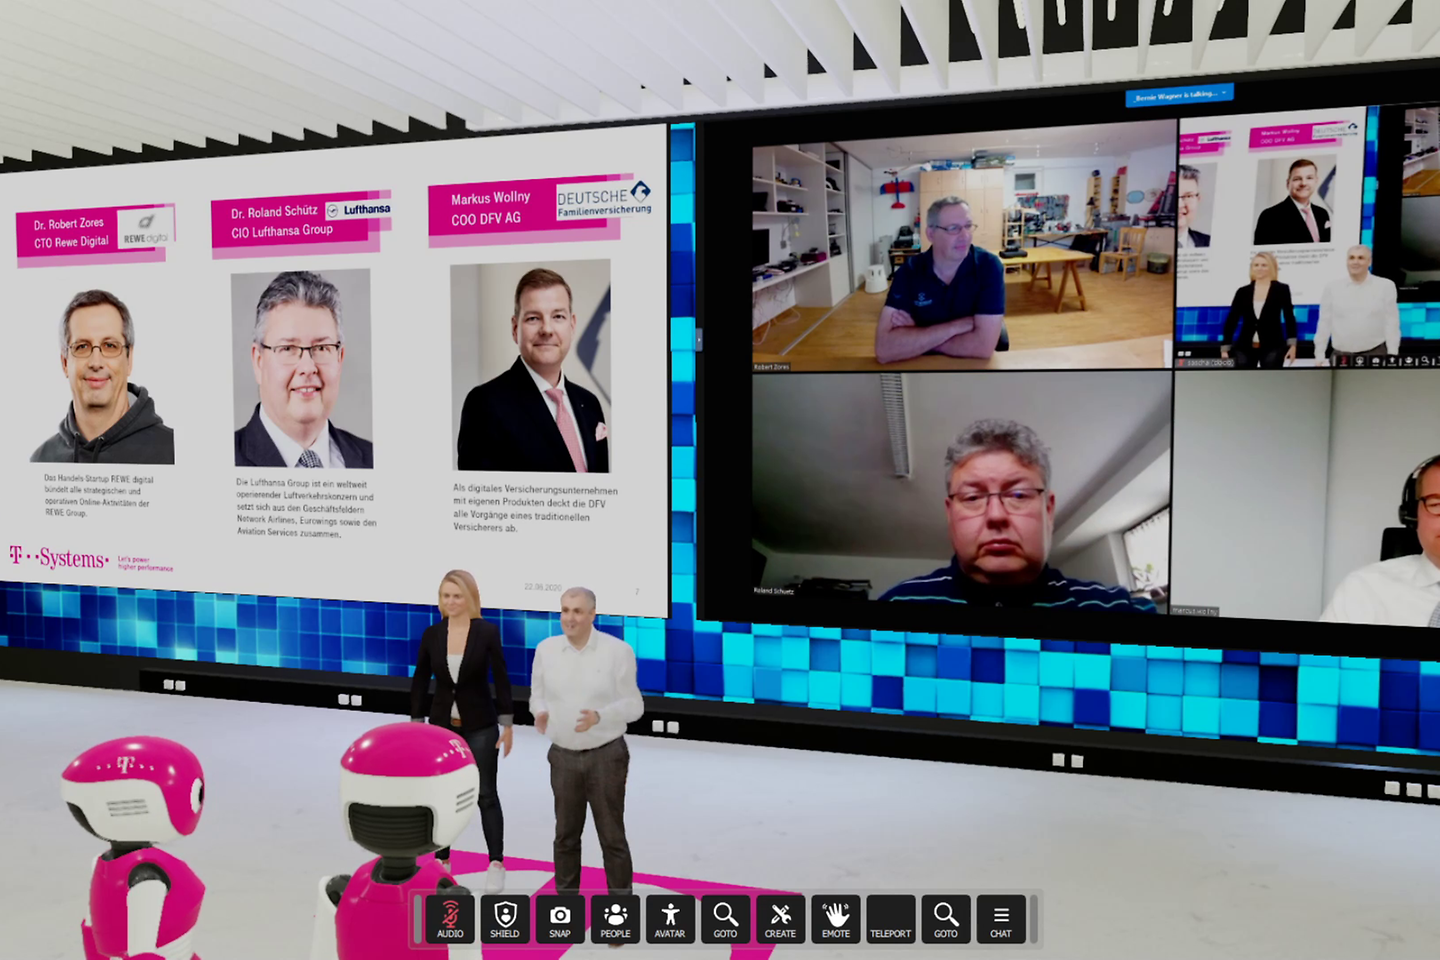 Video conference in a virtual room with two people on a screen via webcam and two virtual moderators standing in the room